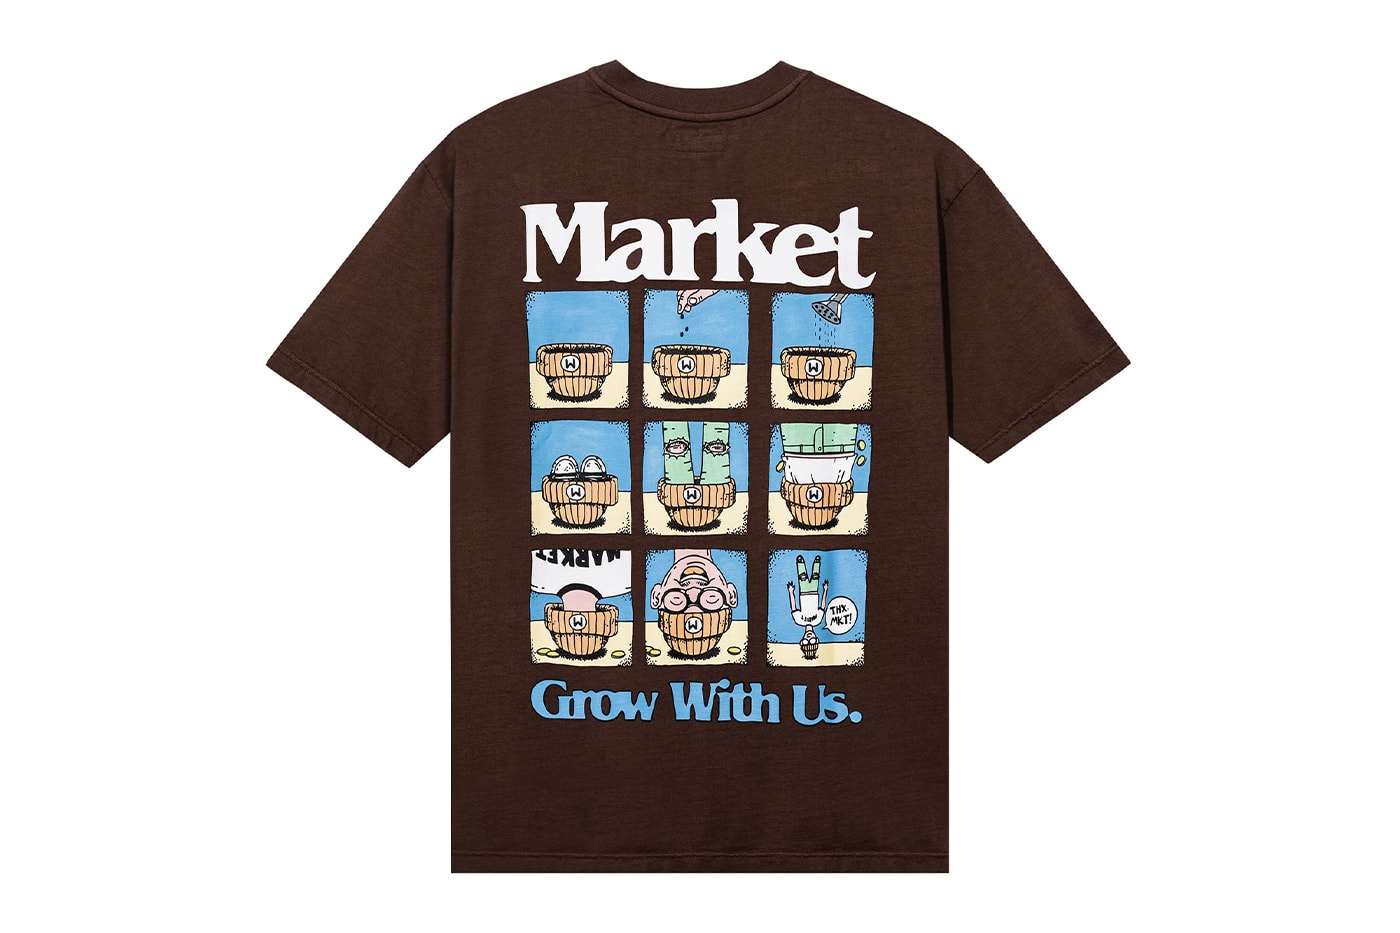 MARKET Brings the Best of Nature to FW23 Collection keep it natural lookbook chinatown market fall winter 2023 hoodies t-shirts denim jeans